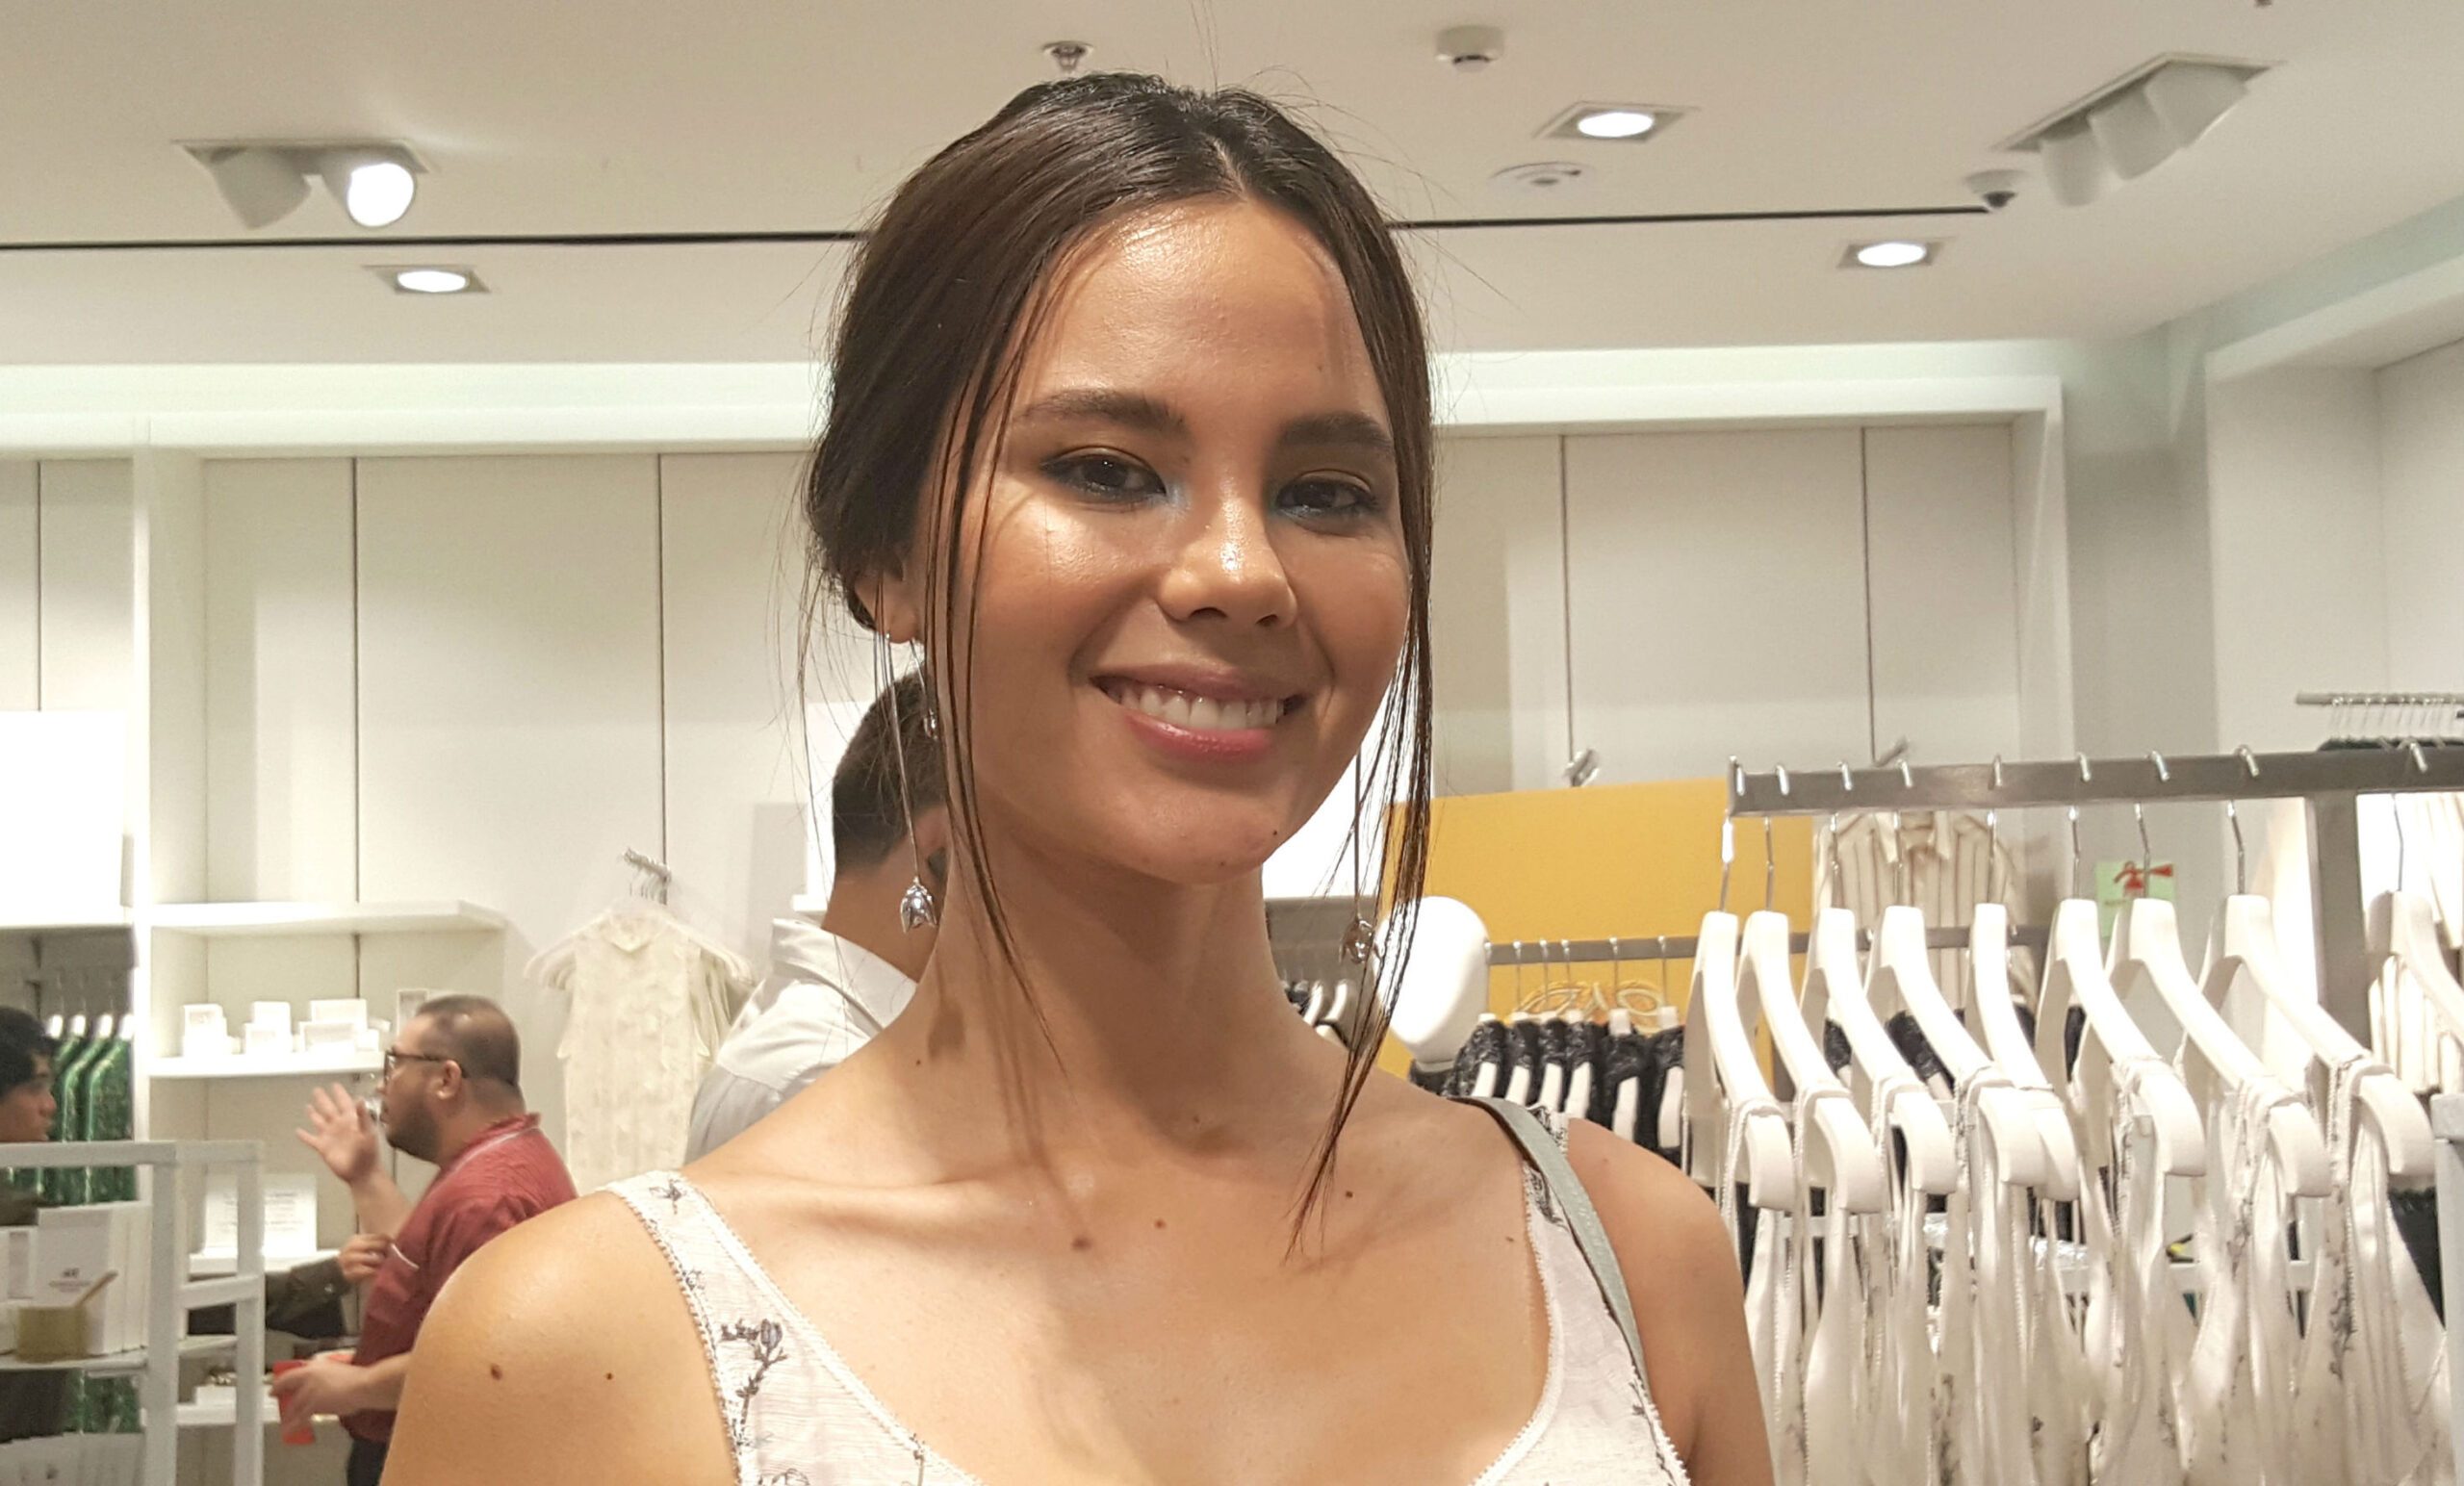 Make way for the queen: Catriona Gray charms in Q&As